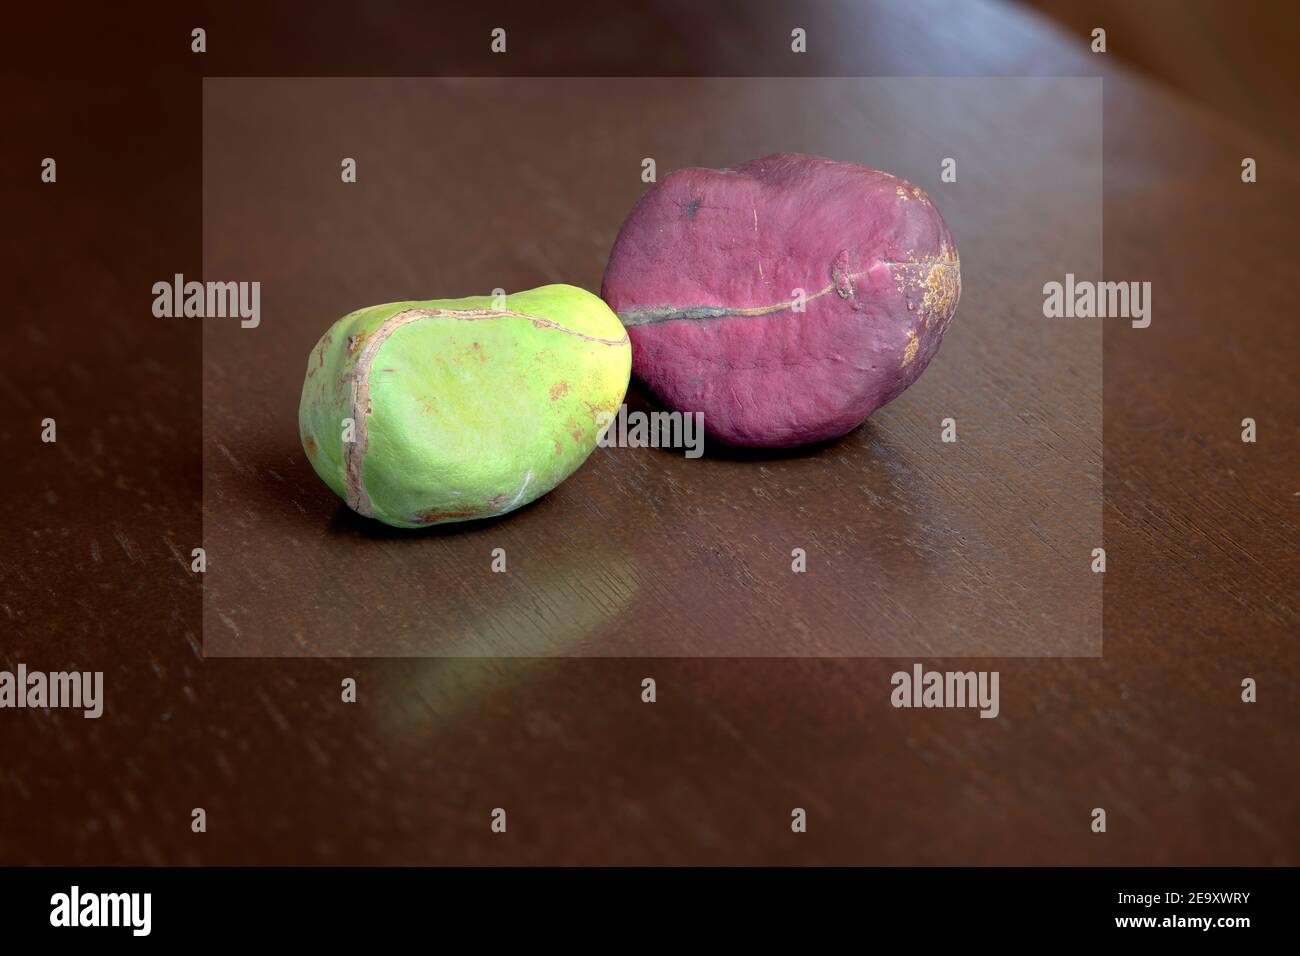 Two different color Kola nuts on a wood surface Stock Photo